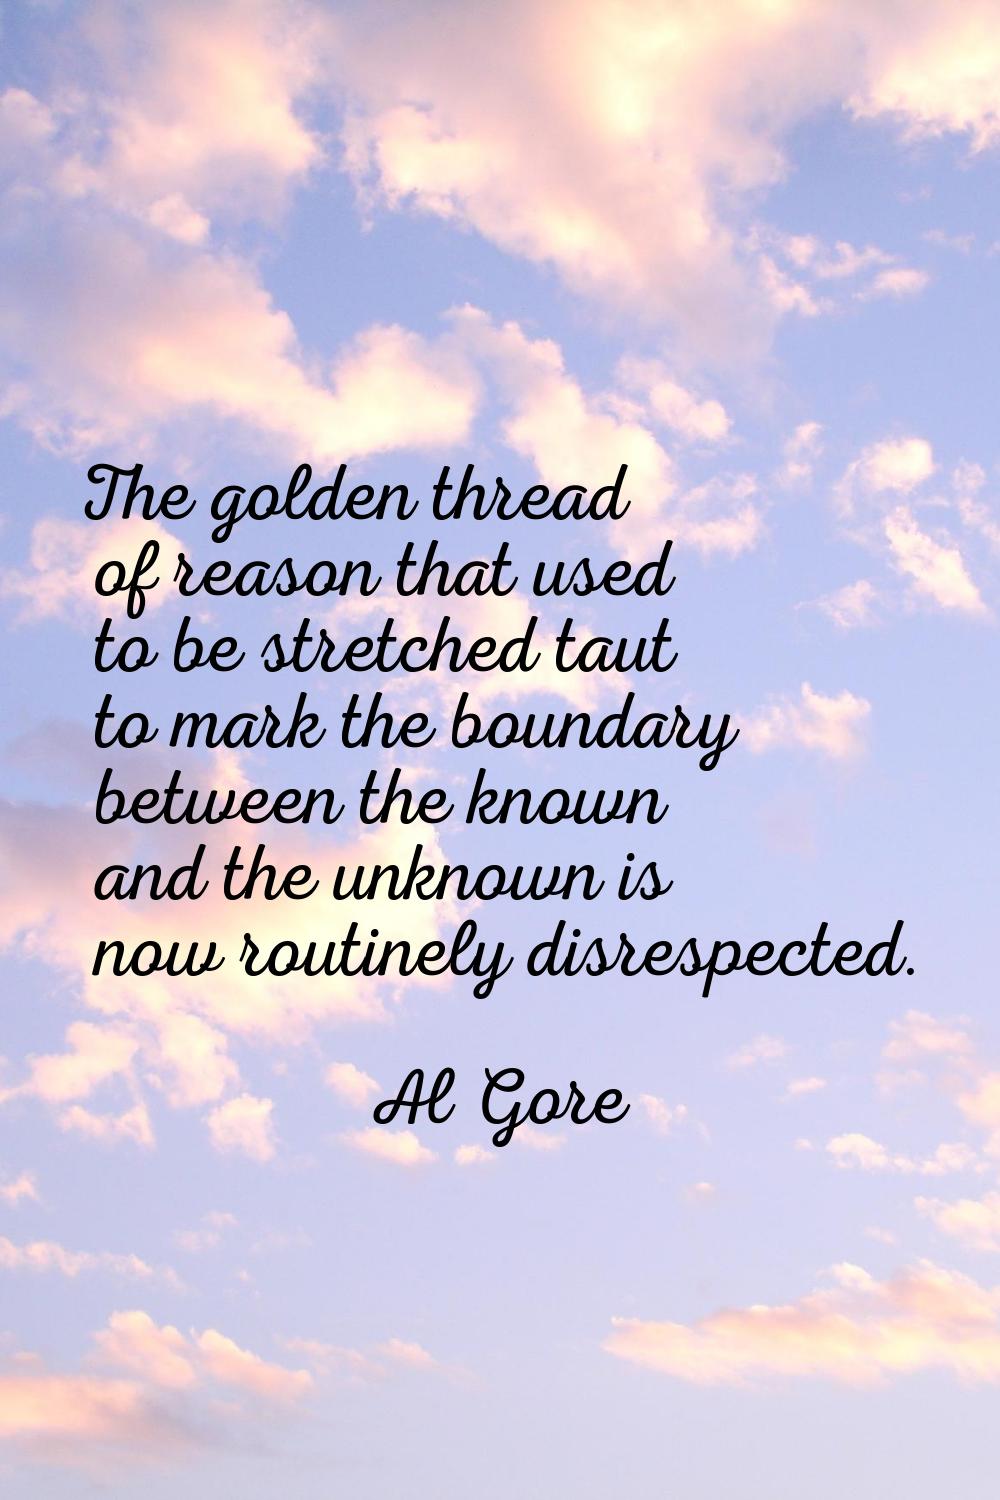 The golden thread of reason that used to be stretched taut to mark the boundary between the known a